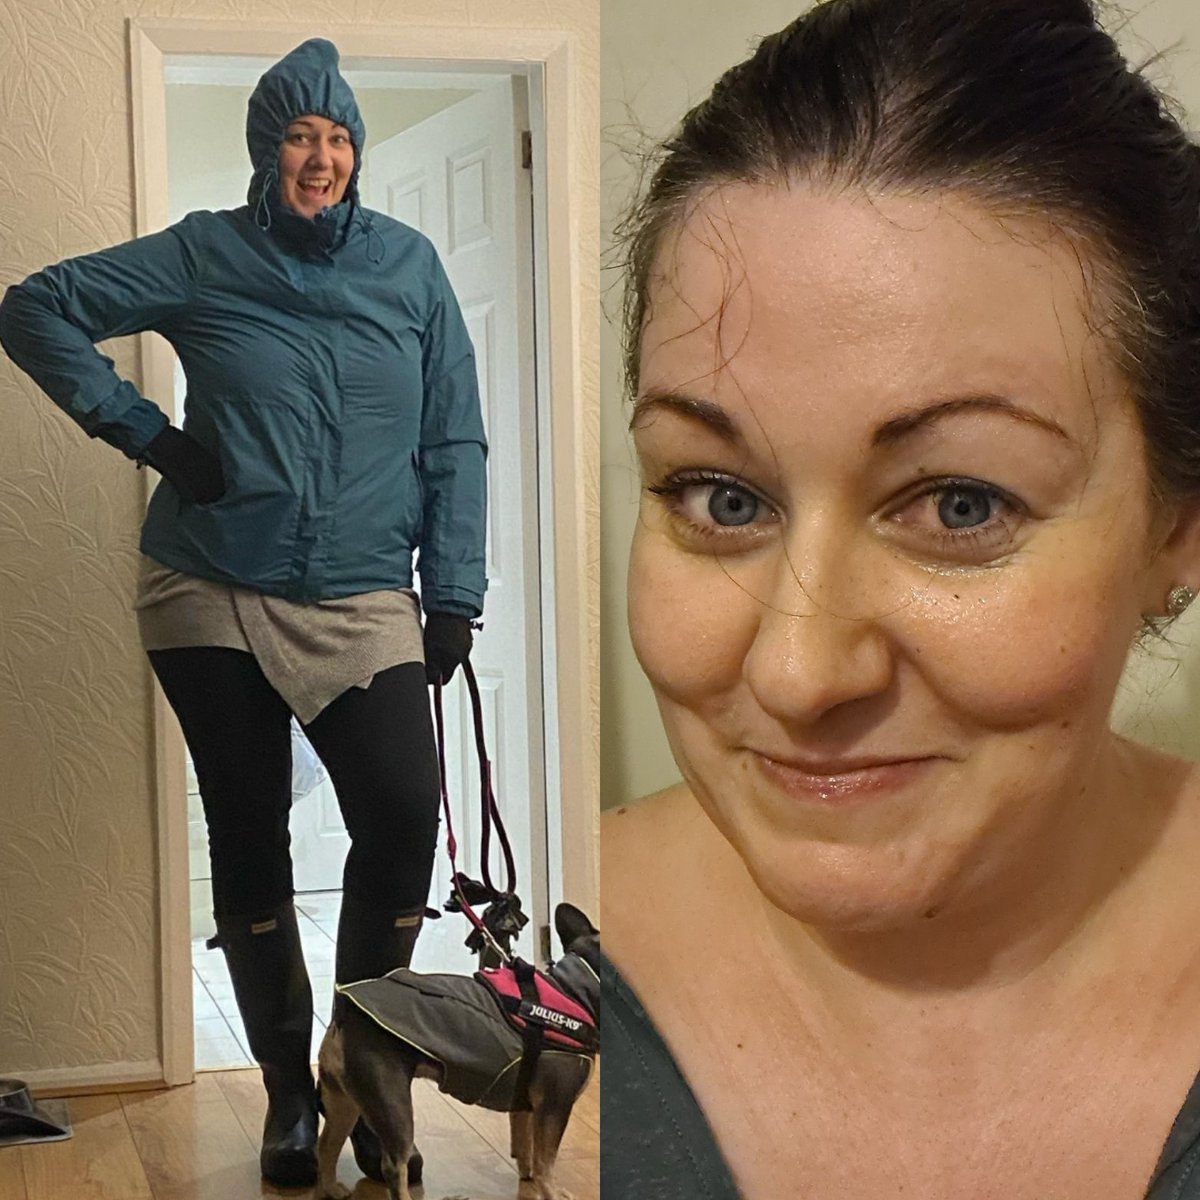 Come rain, snow, wind or shine the dog wants a walk.... heres the before and after...#StormIsha #windandrain #showerwelcome